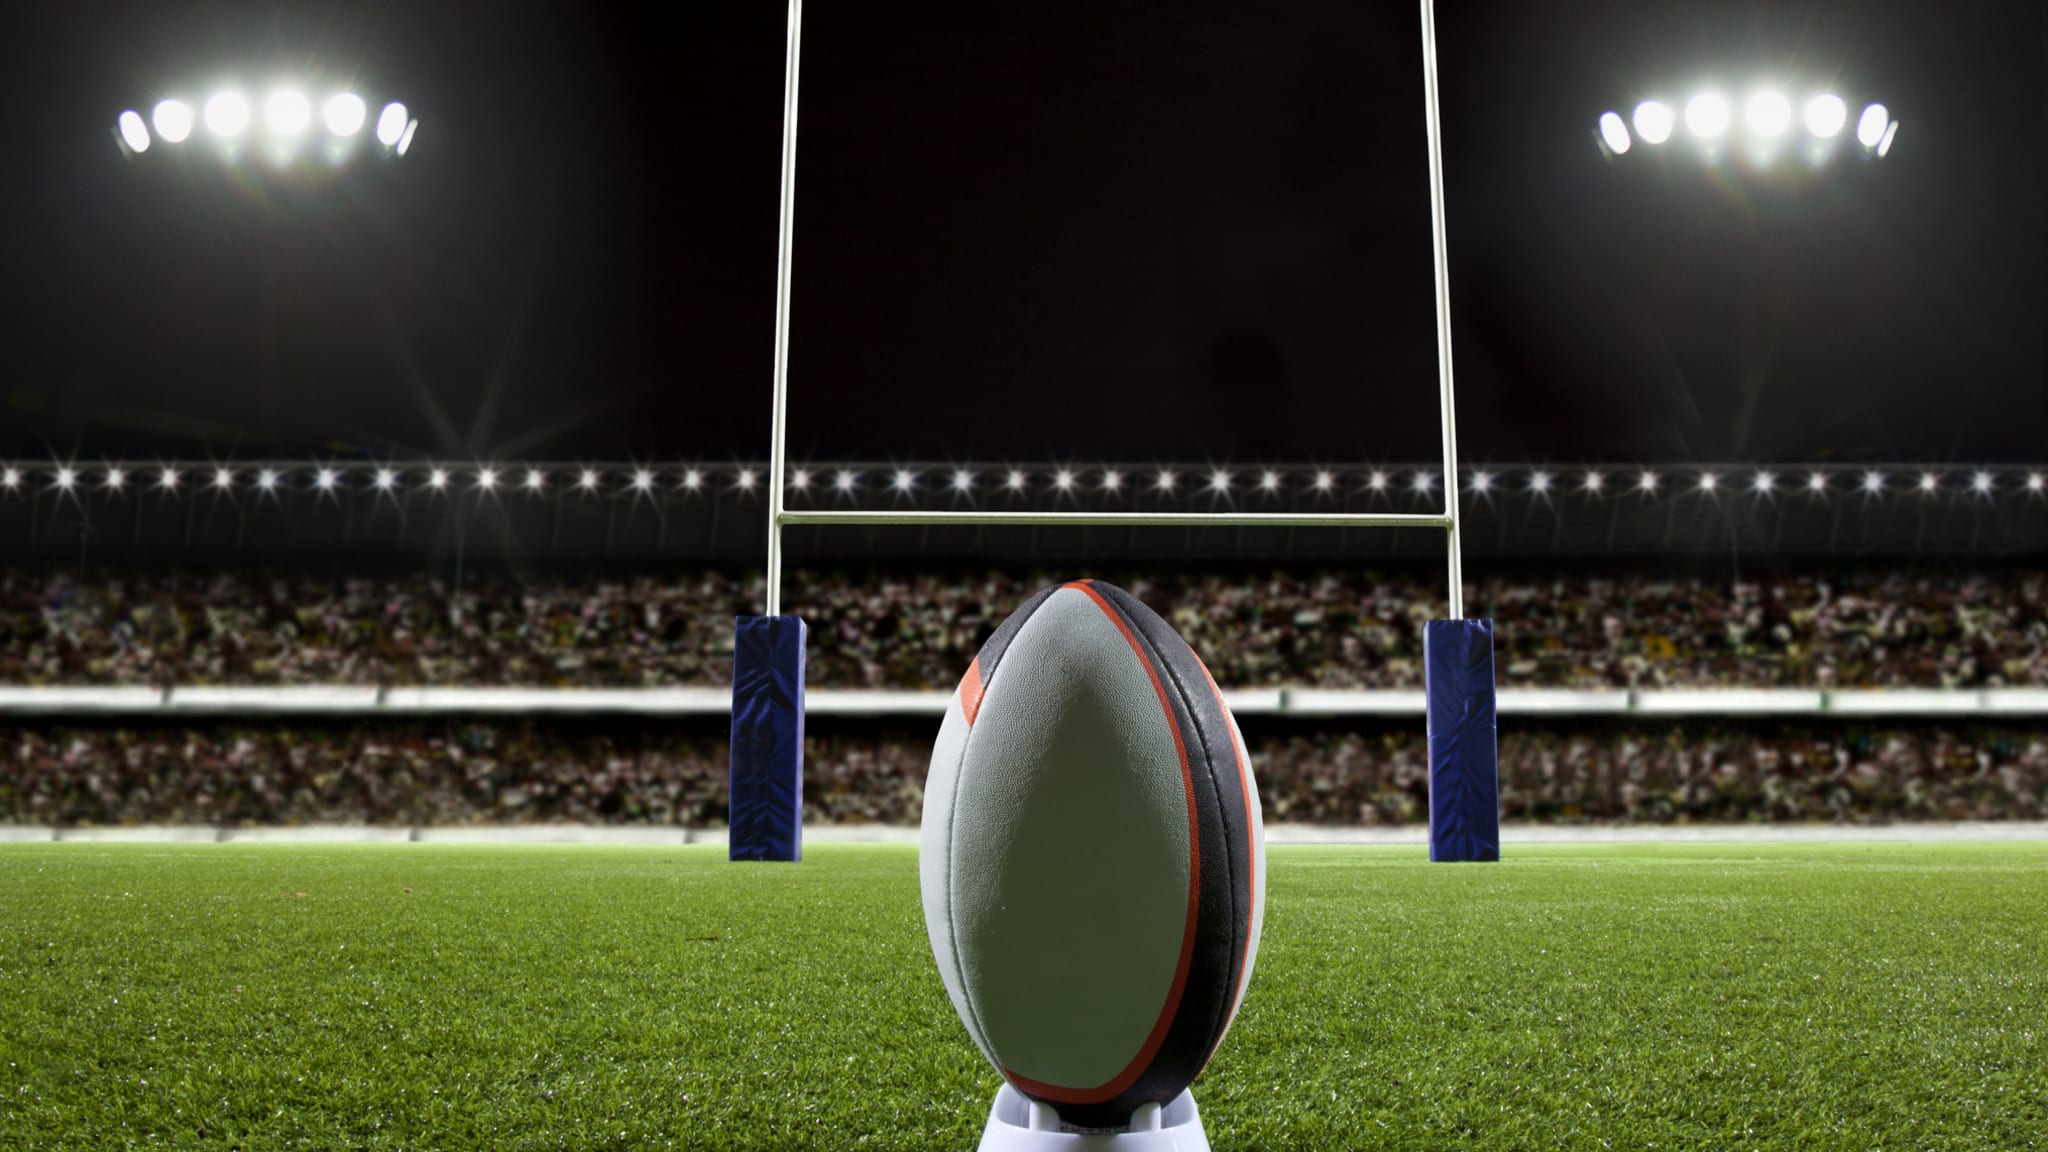 Rugby-Ball in Stadion © Photo and Co/The Image Bank via Getty Images